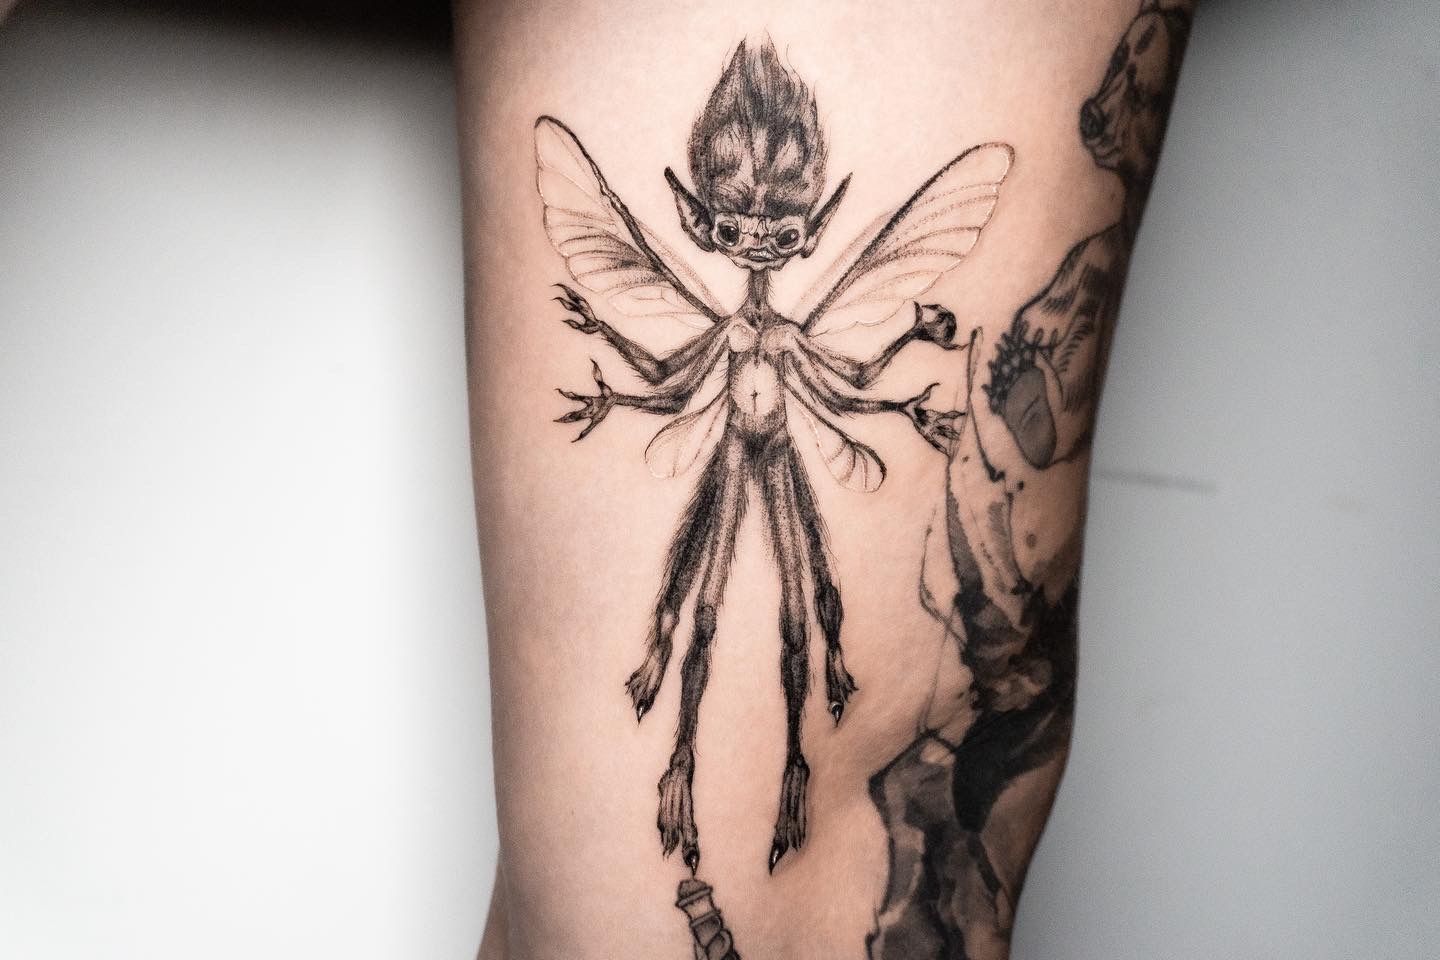 101 Best Simple Fairy Tattoo Ideas That Will Blow Your Mind!